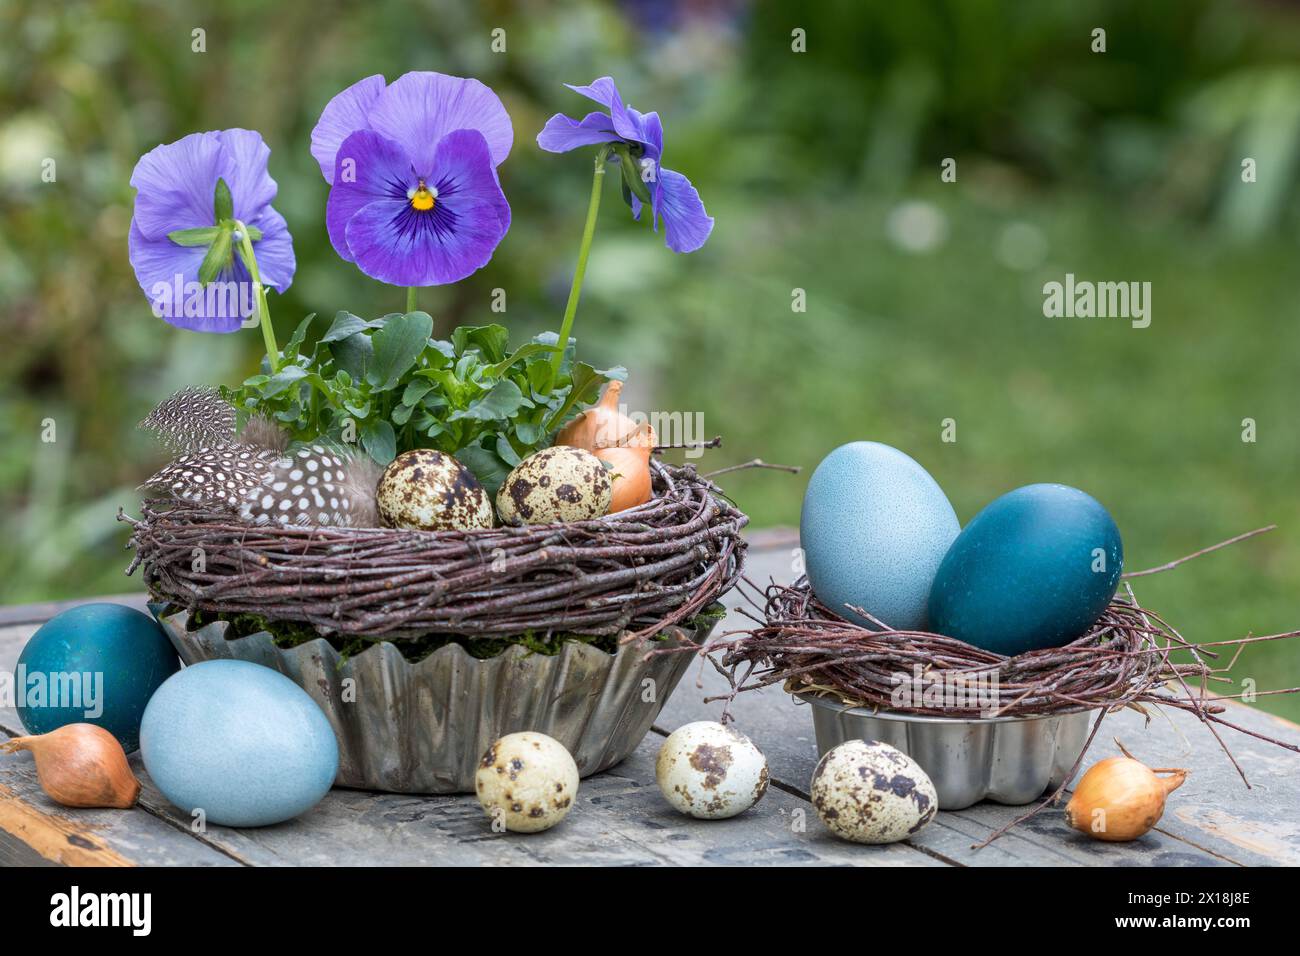 easter arrangement with purple viola flower and blue coloured eggs Stock Photo